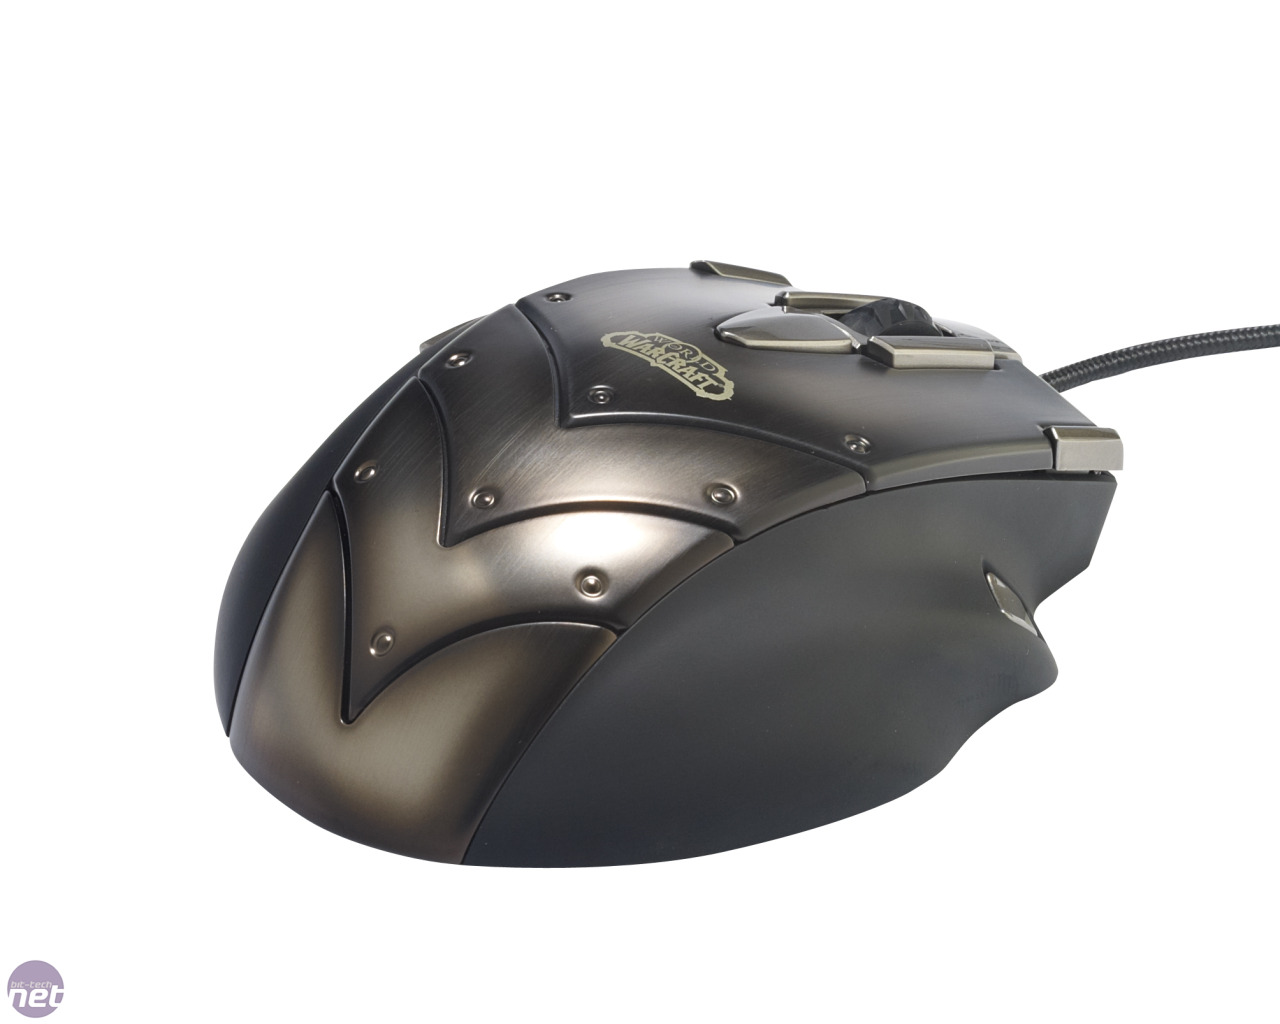 World Of Warcraft Cataclysm Mouse Review